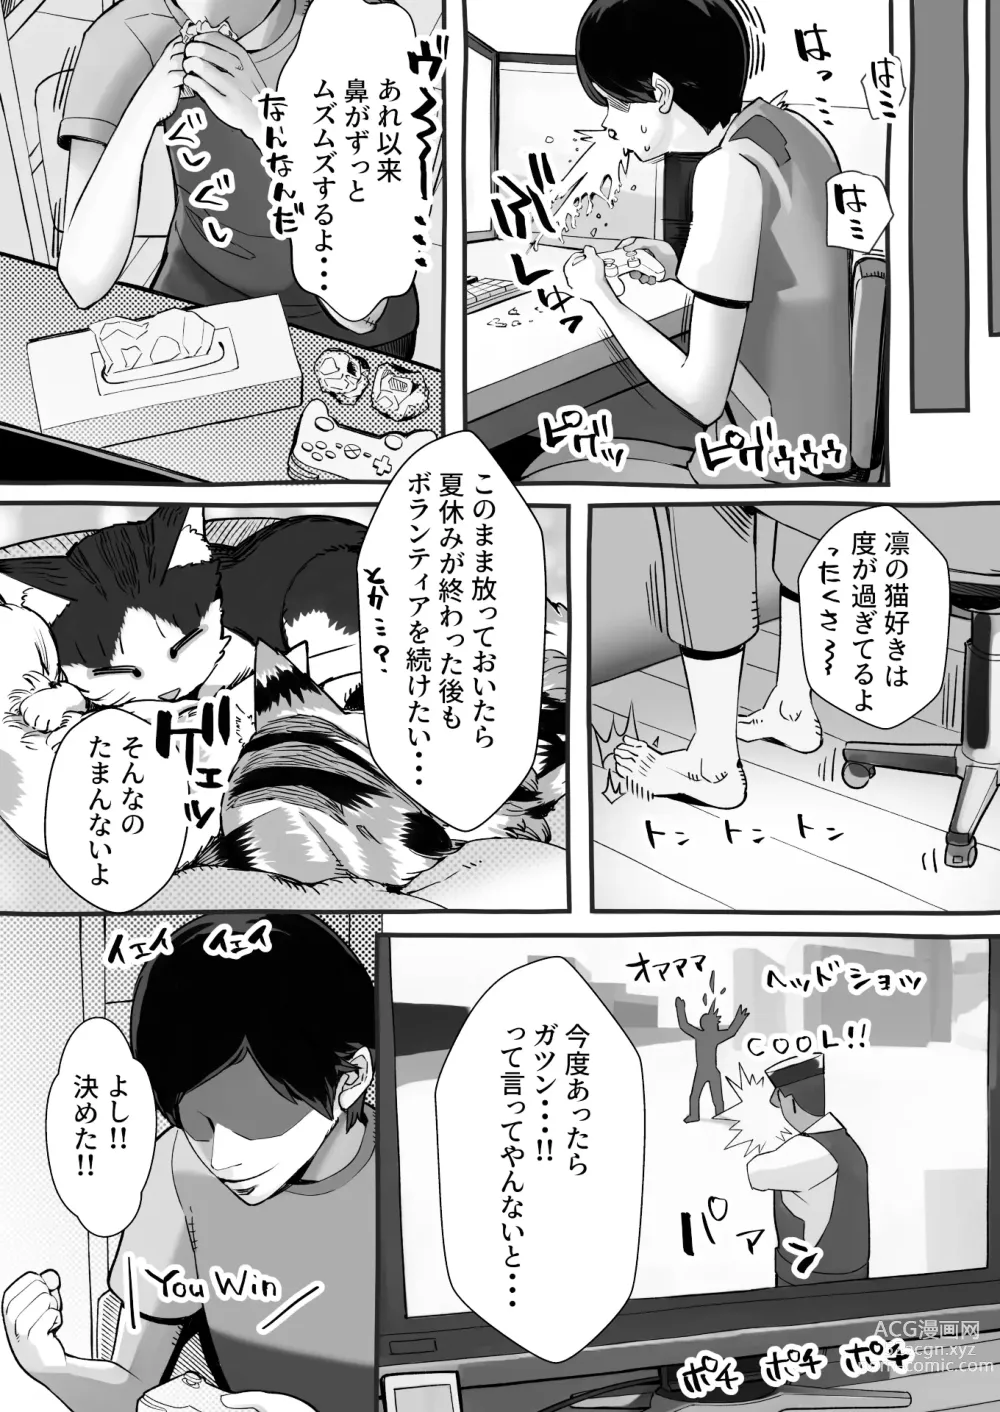 Page 30 of doujinshi 僕の彼女が他人棒で絶頂いたす